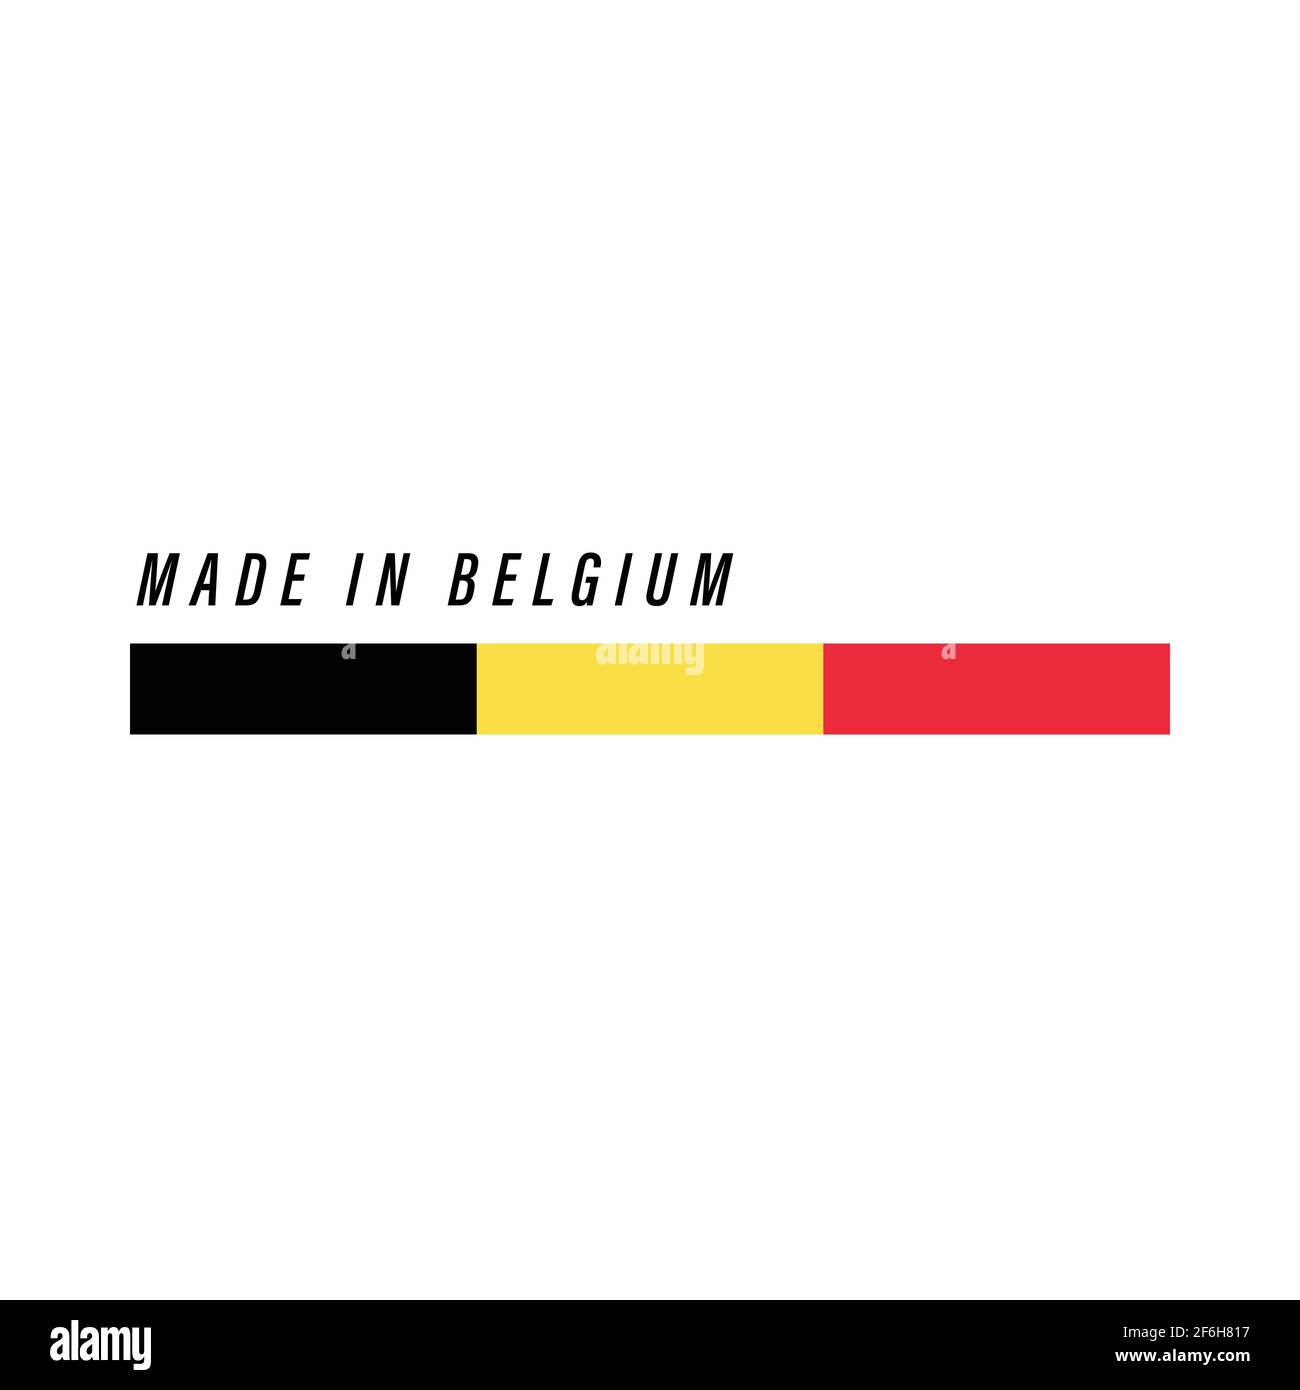 Made in Belgium labels in English, French, - Stock Illustration  [77274710] - PIXTA